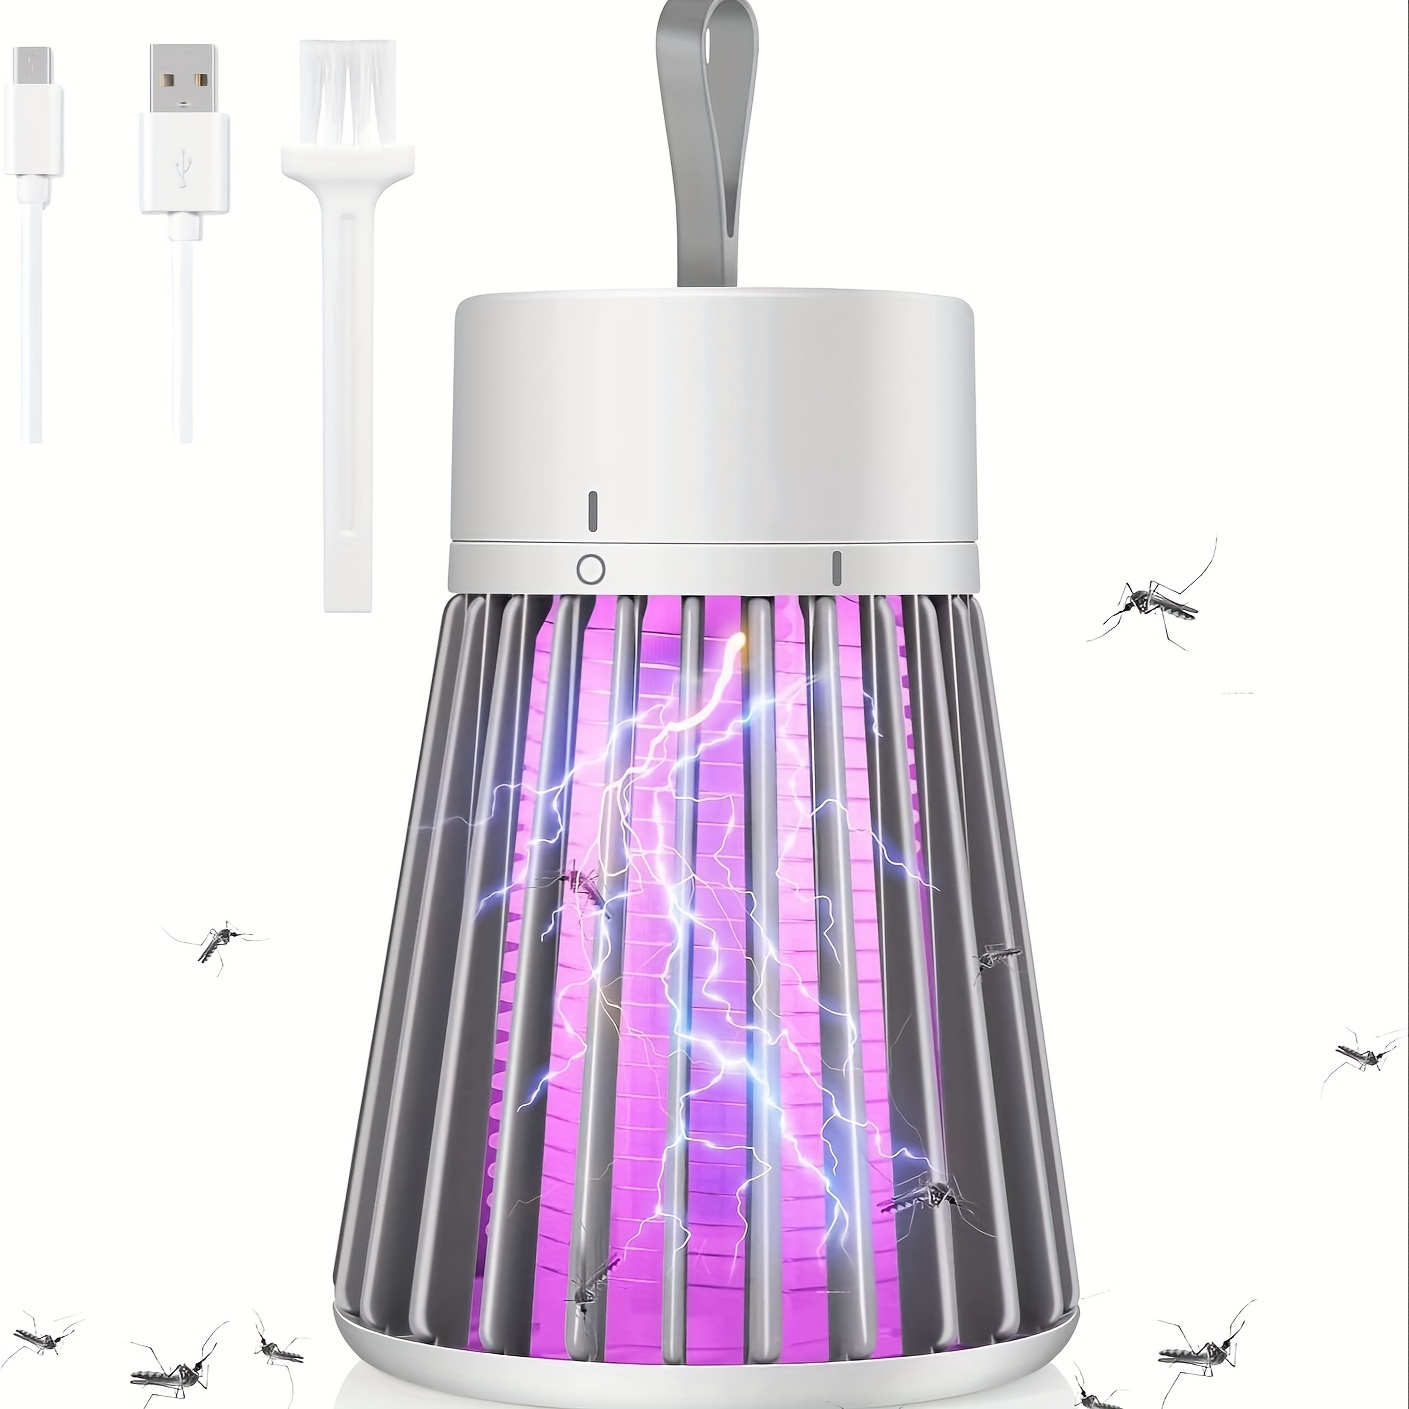 

Bug Zapper, Mosquito Zapper Fly Trap Losquito Killer Lamp Usb Electric Radiationlessled Mute Bed Bug Killer Indoor For Mosquito Insect Gnat Moth Fruit Flies With A Smallbrush (decorative Buttons)